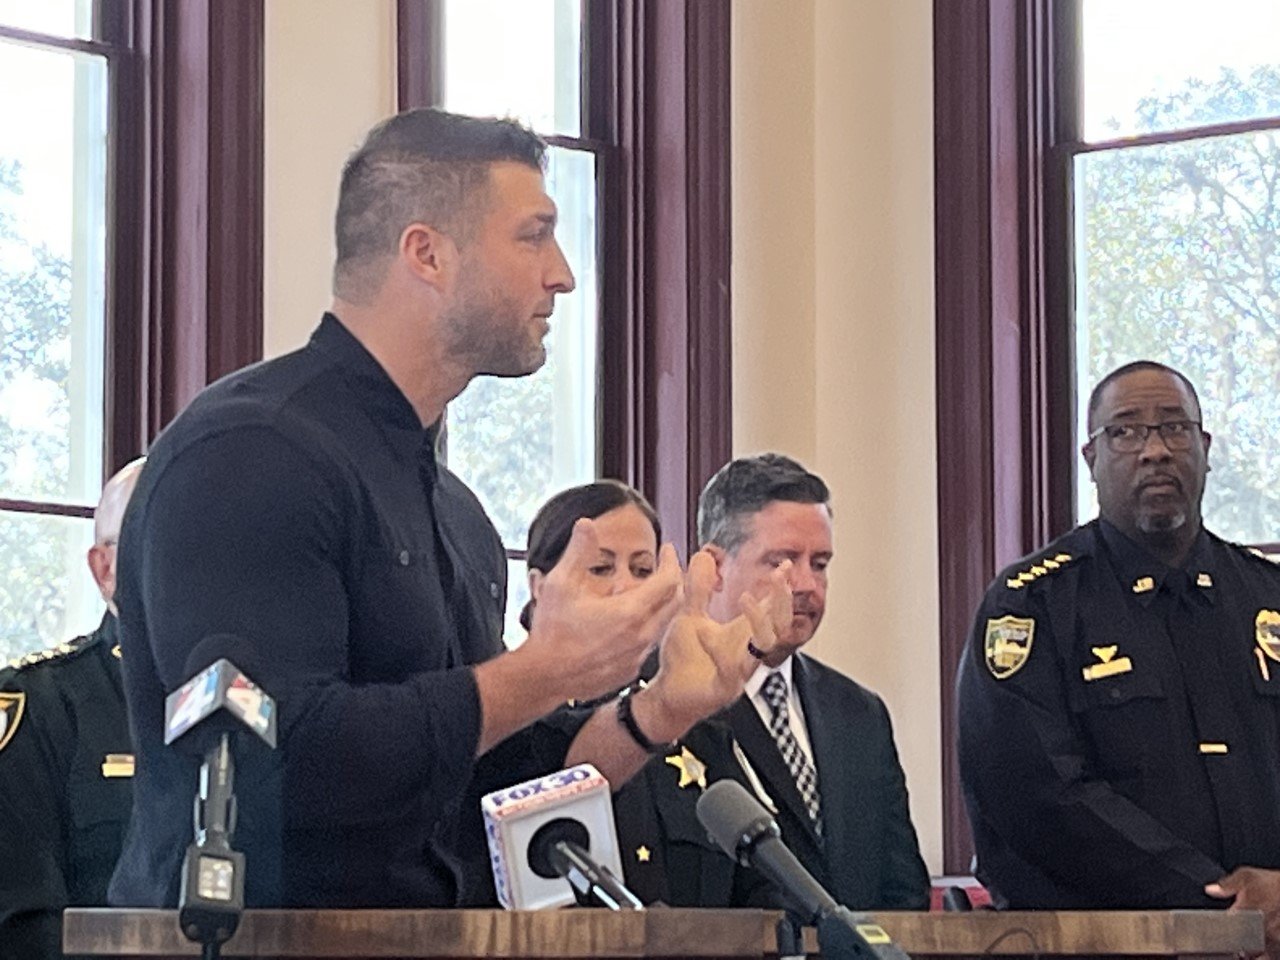 Tim Tebow became passionate and emotional after INTERCEPT was created in Northeast Florida to stop child exploitation and human trafficking.